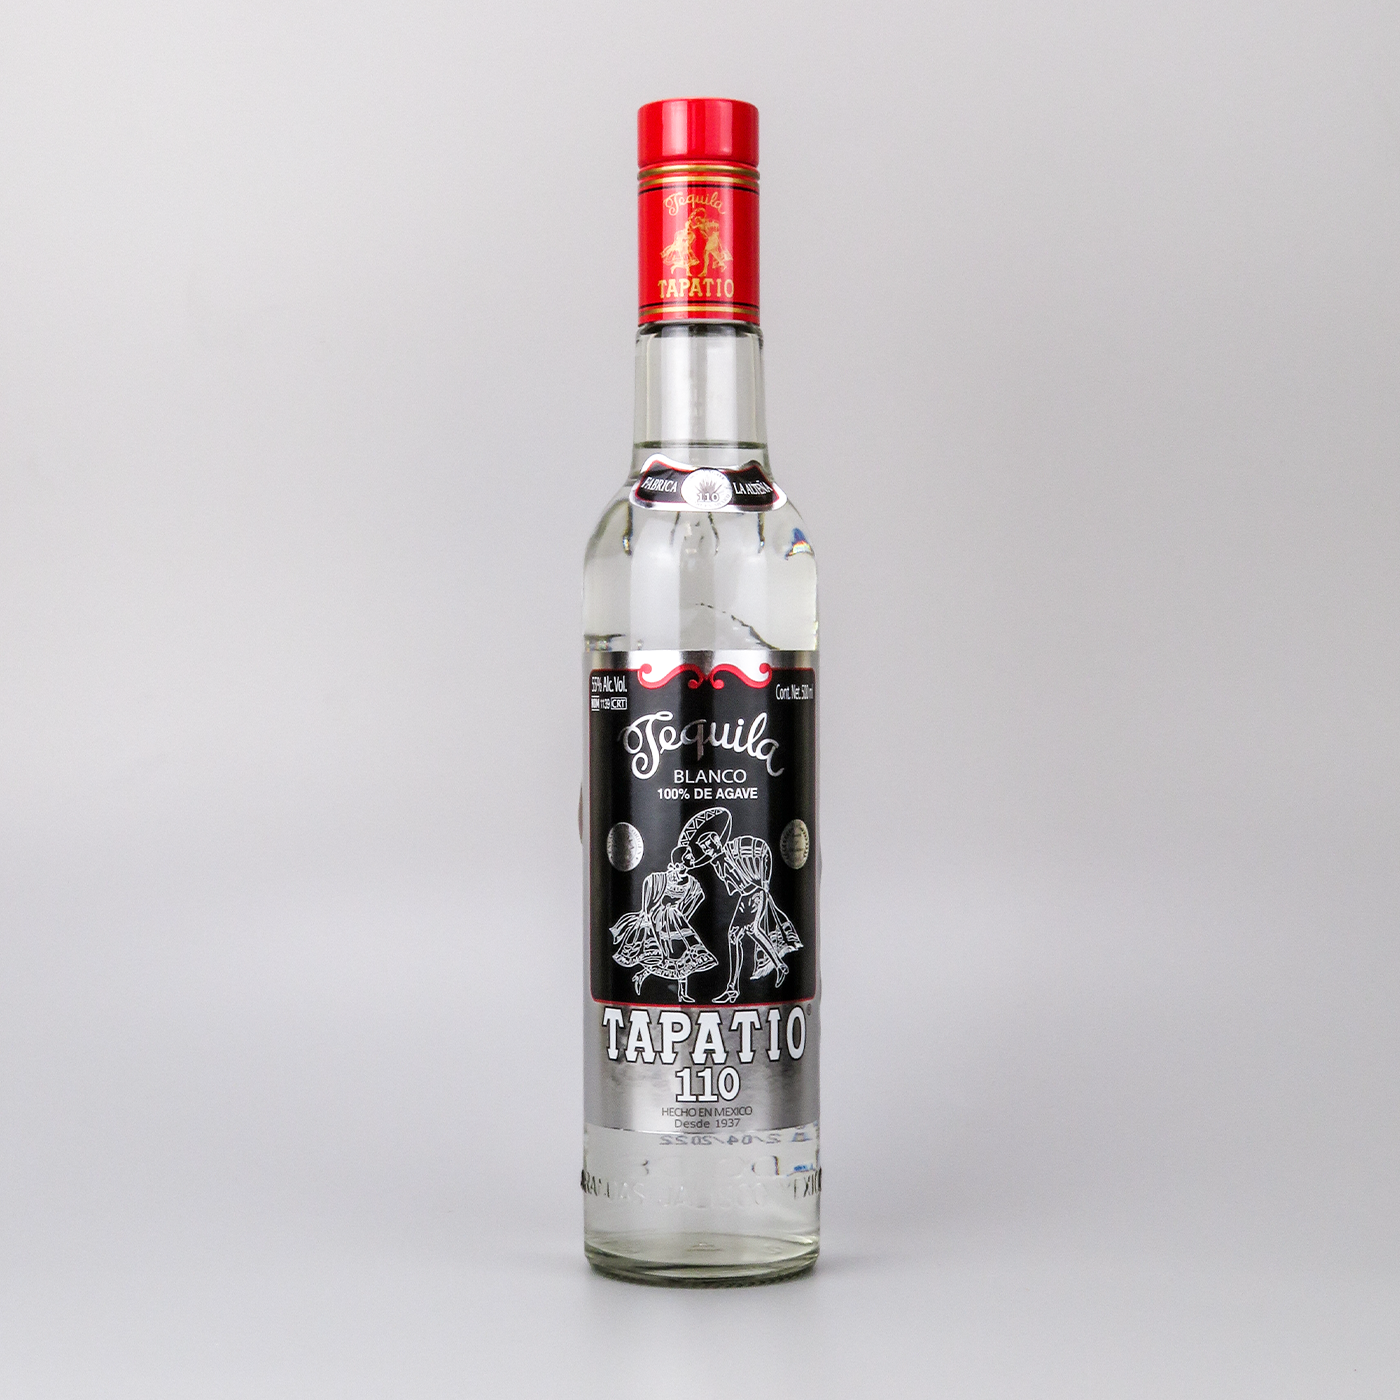 Tapatio 110 - product image